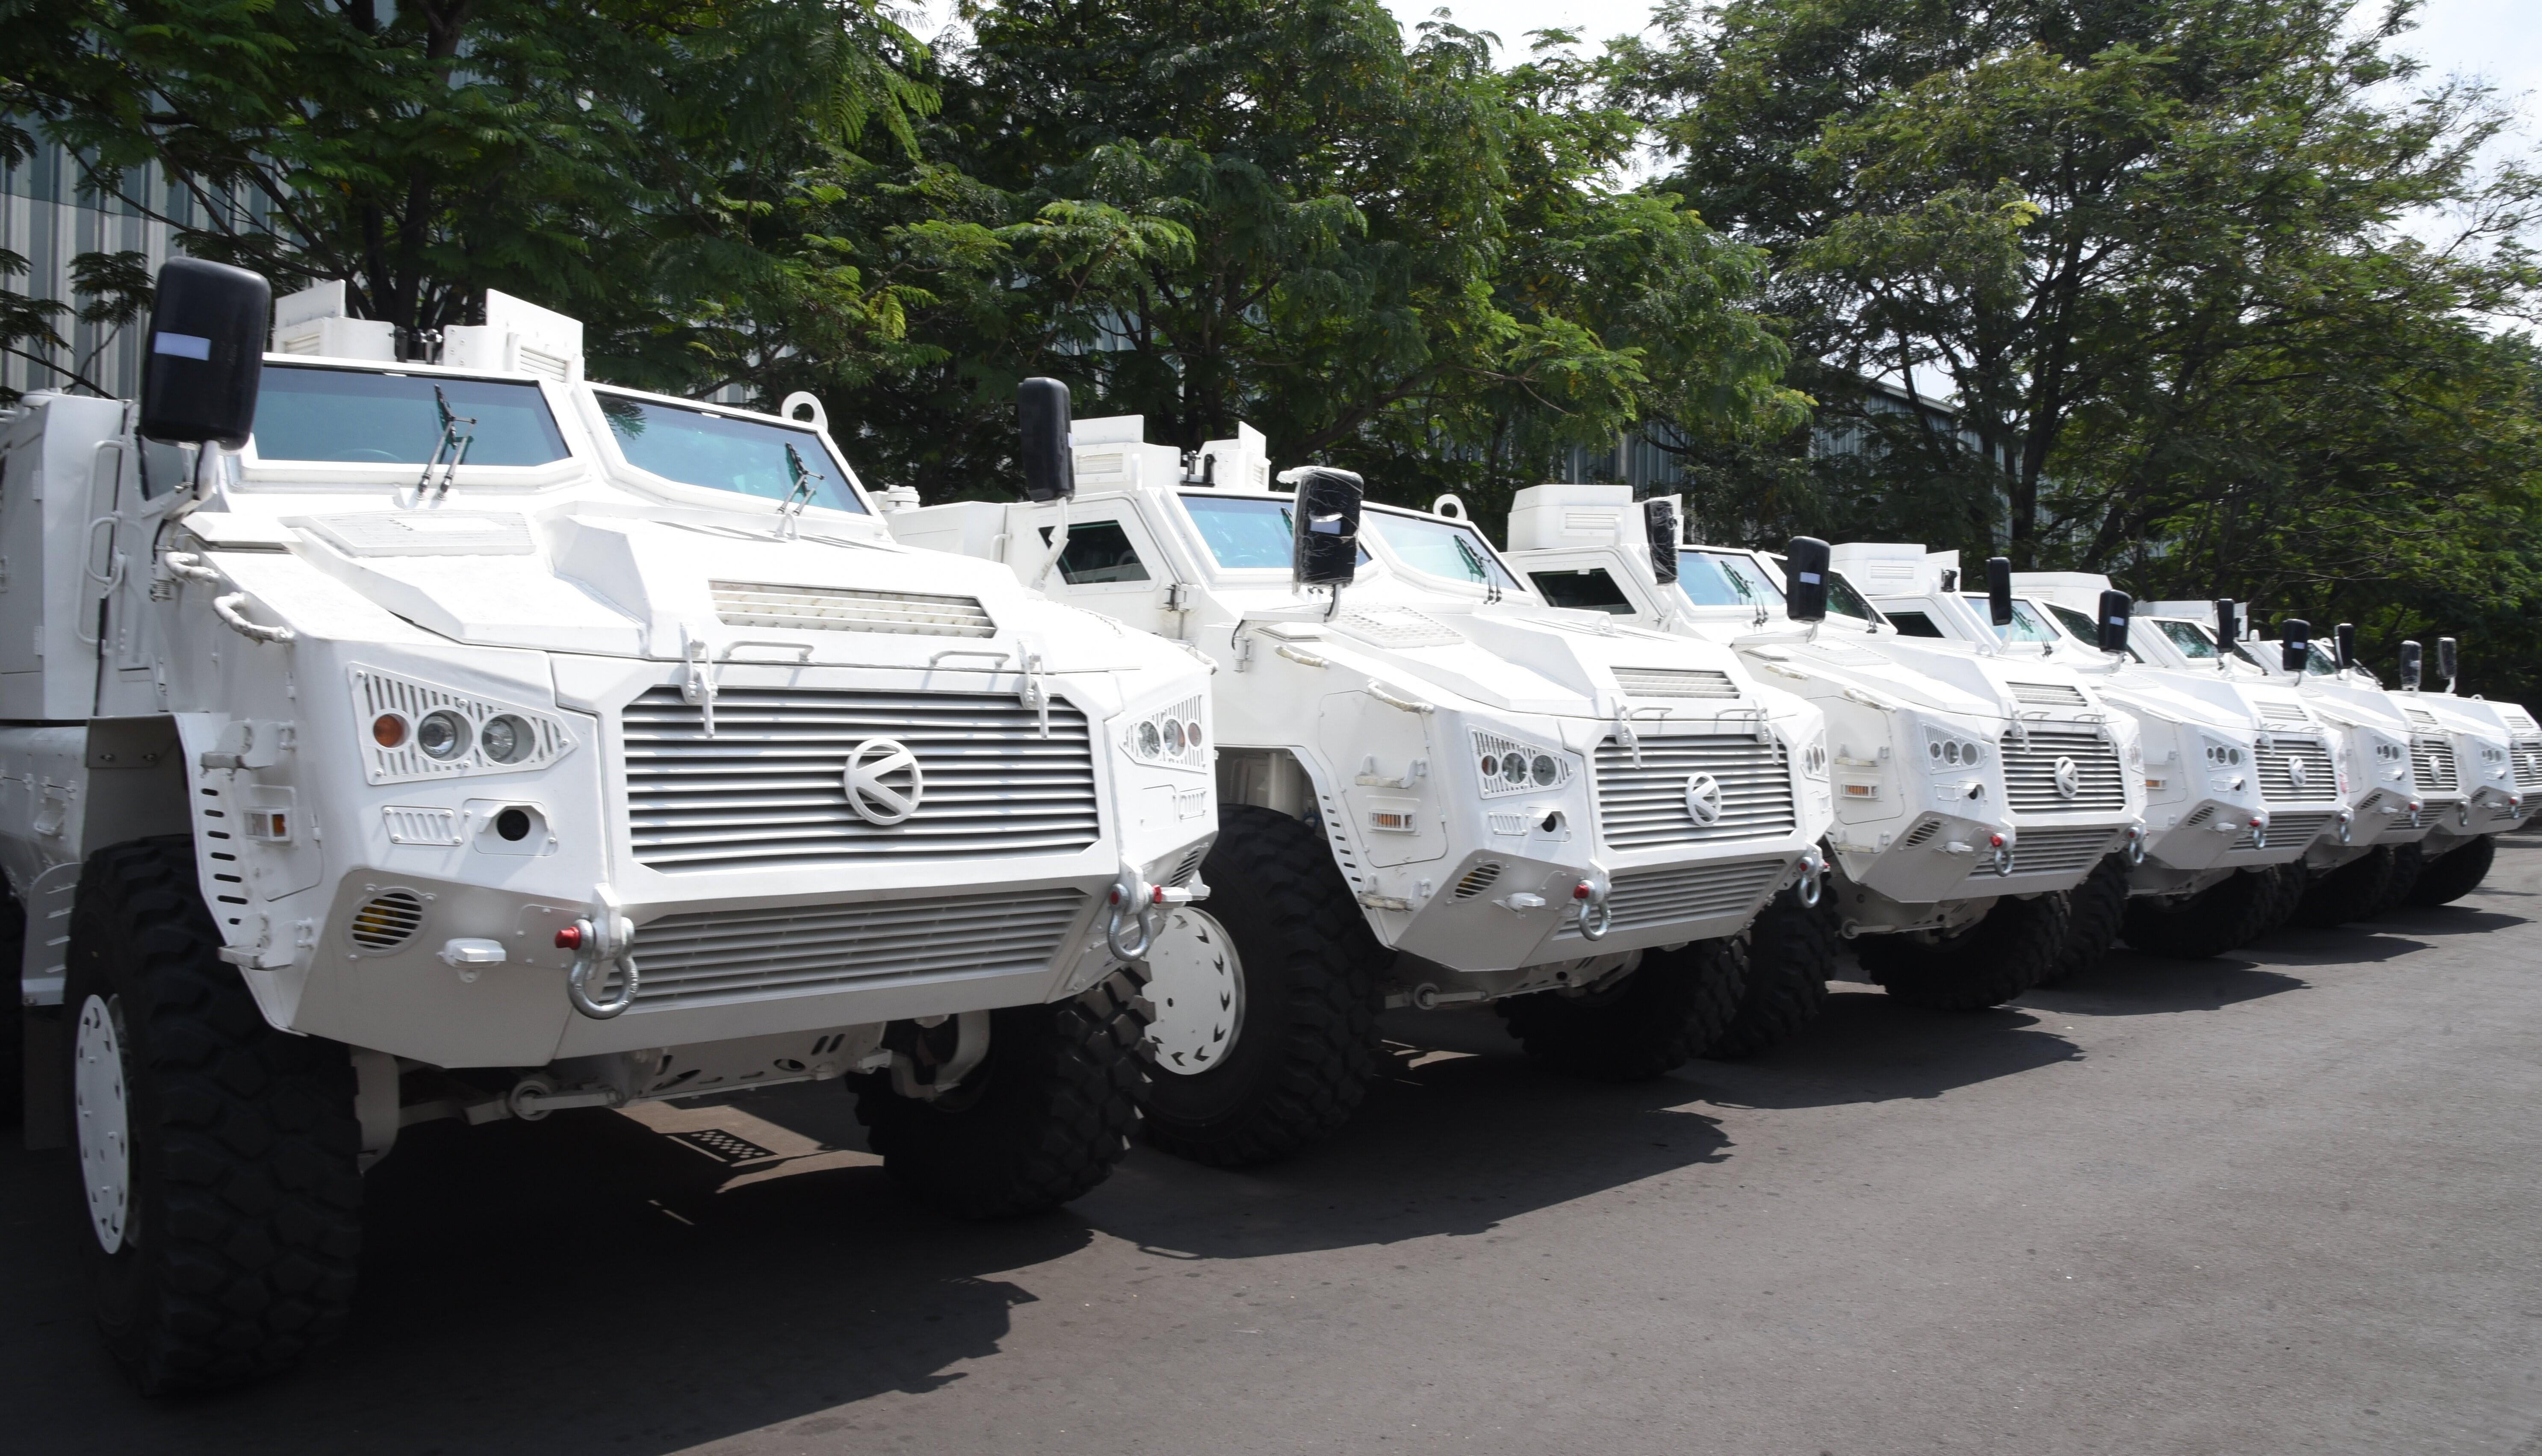 Bharat Forge hands over Kalyani M4 vehicles to Indian Army for UN Peacekeeping Missions